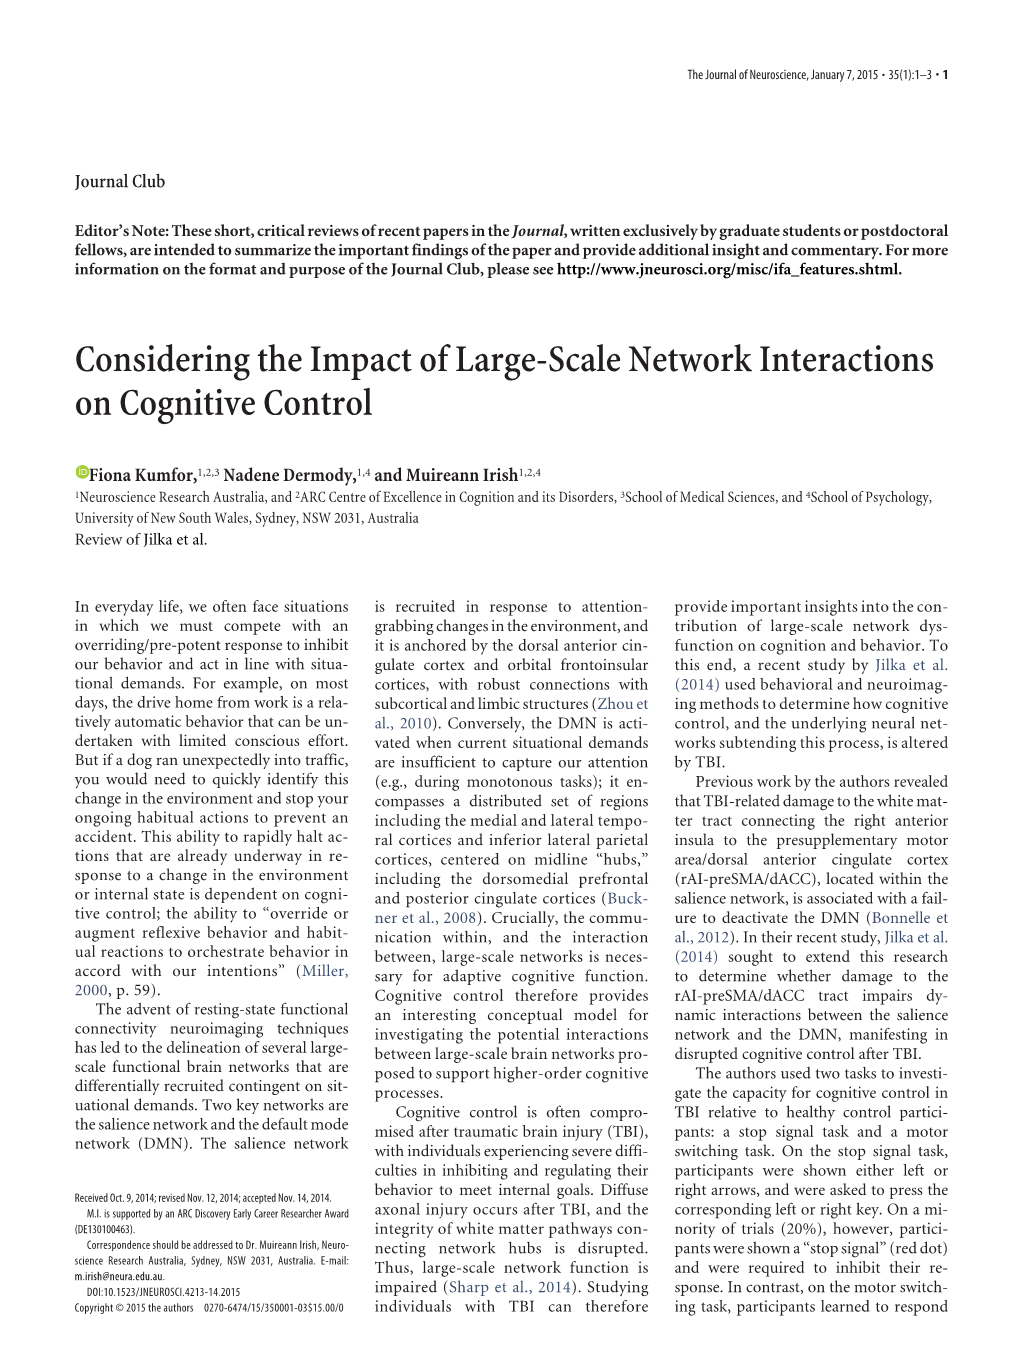 Considering the Impact of Large-Scale Network Interactions on Cognitive Control